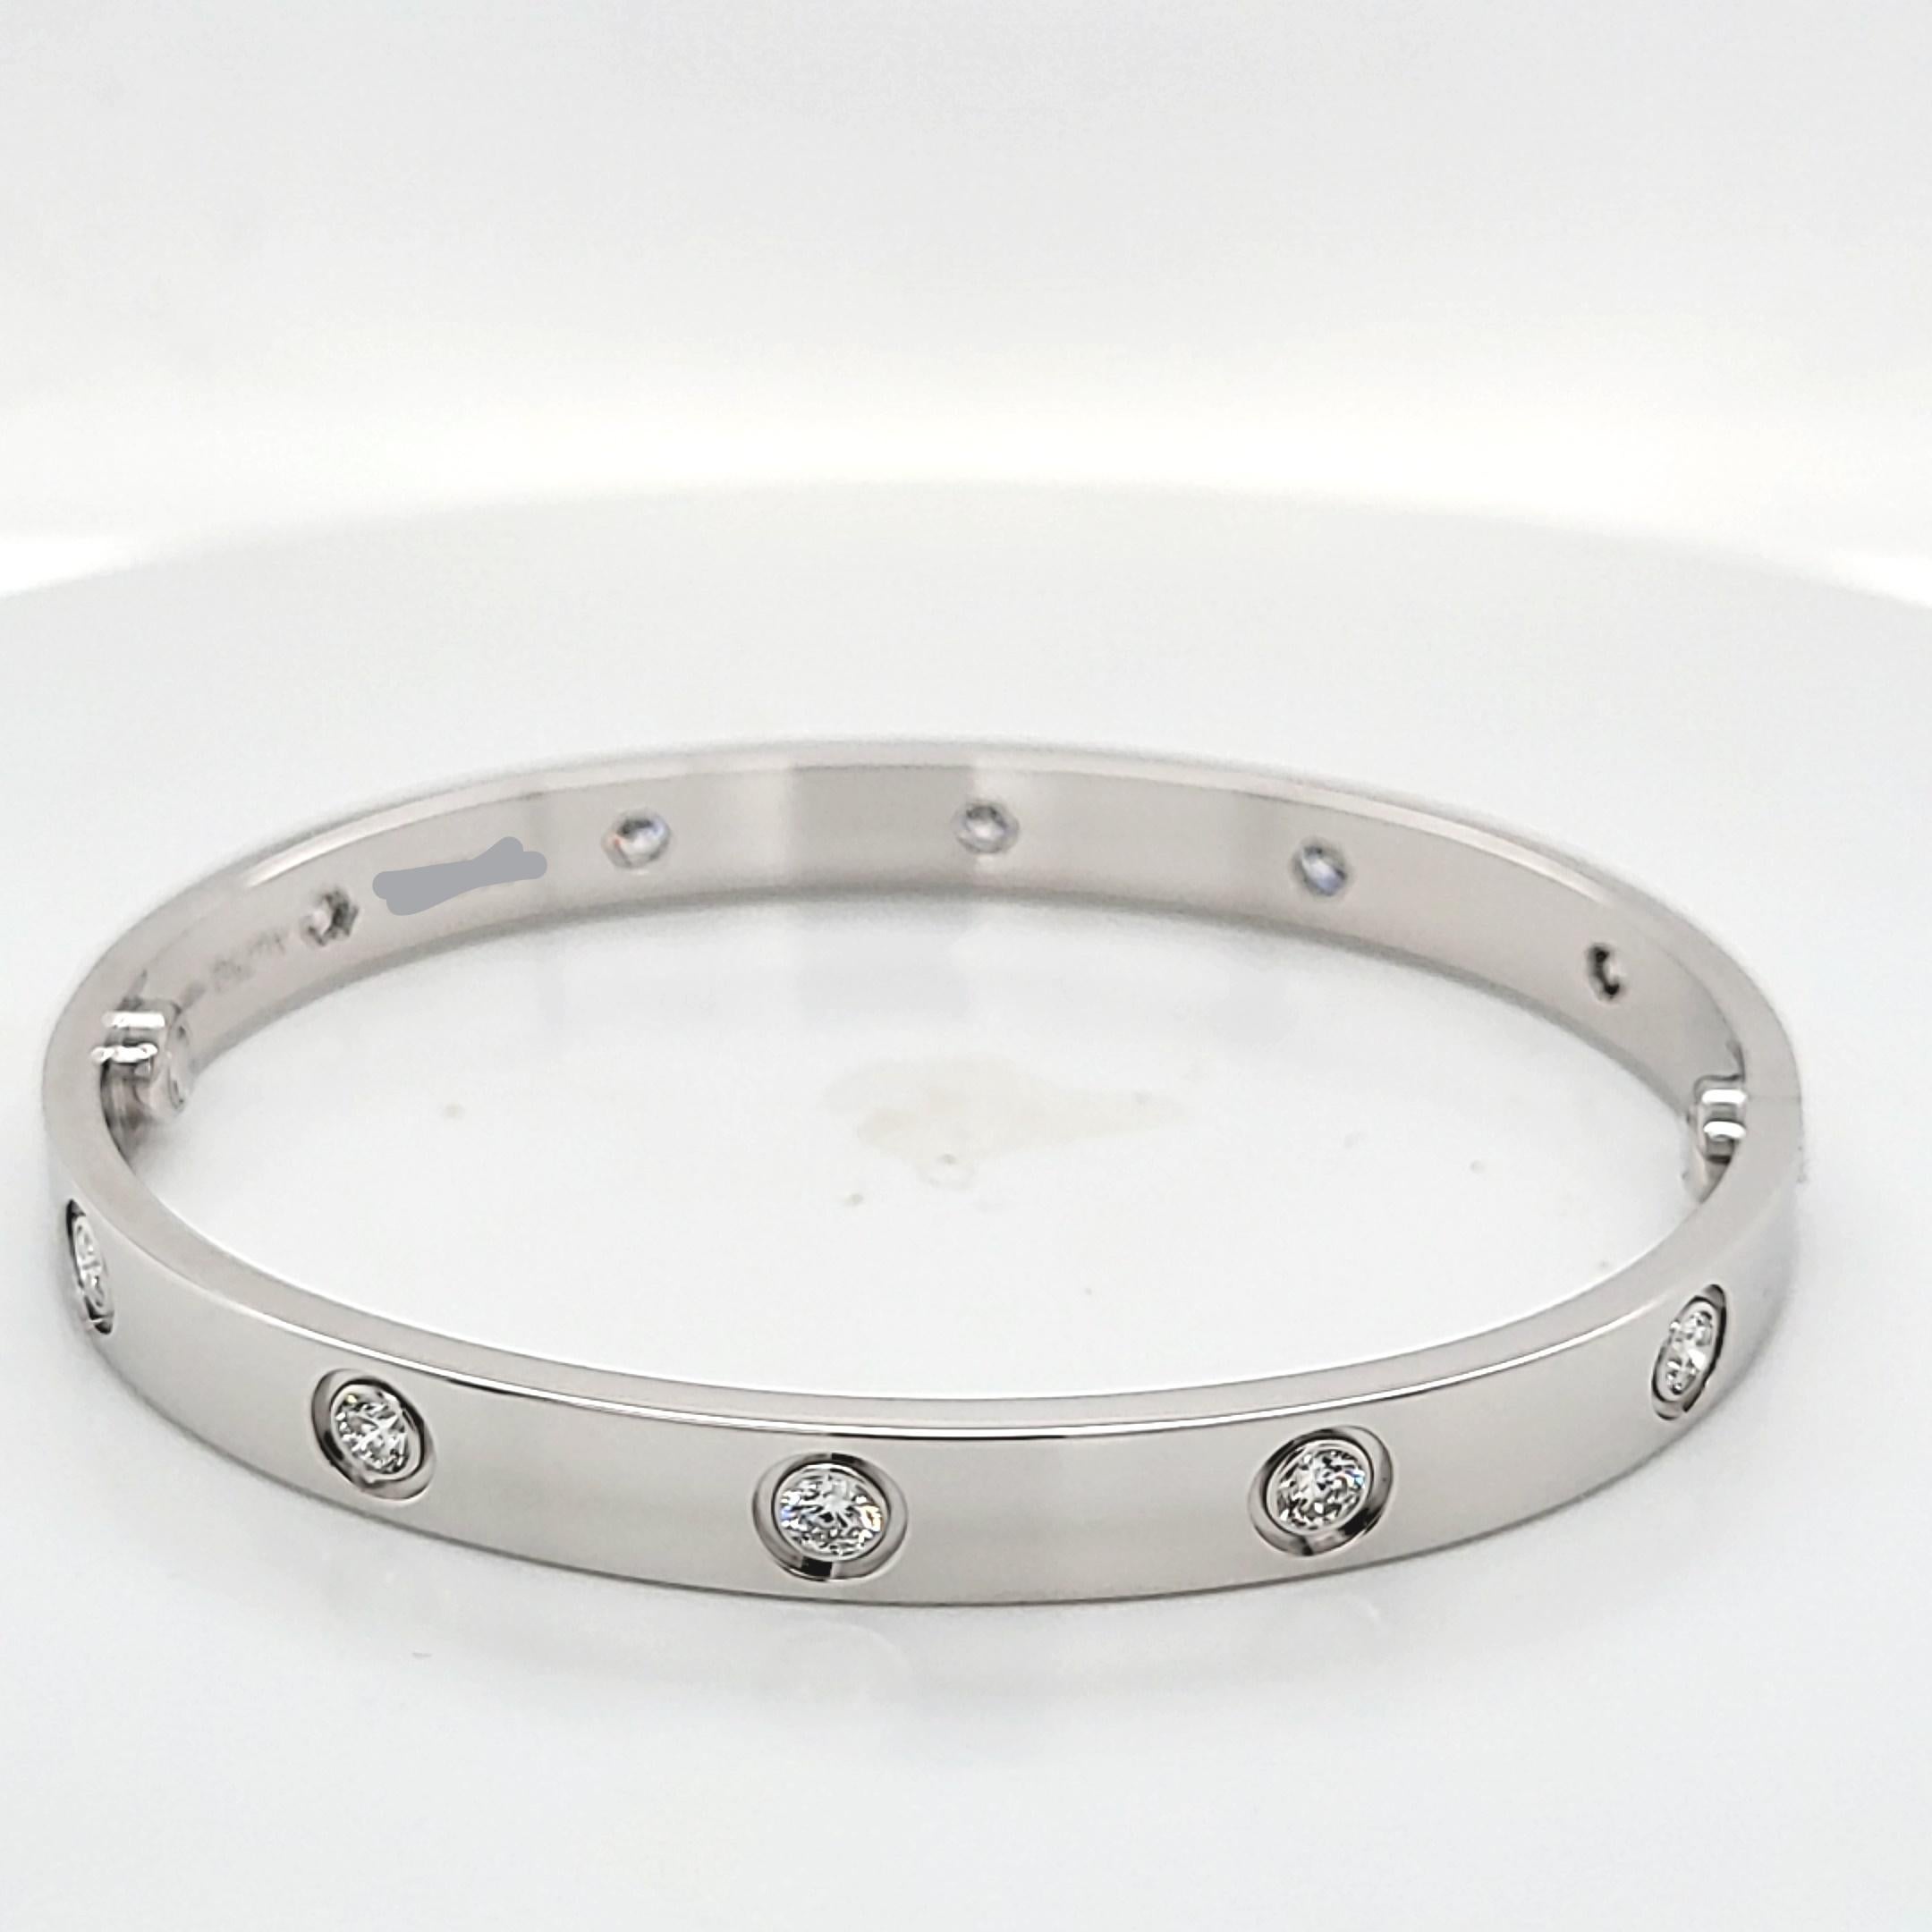 This iconic bracelet from Cartier features 10 round diamonds with a total weight of 0.96 carats. It is crafted in 18 karat white gold and the width measures 6.1mm. It is a size 17. The screwdriver, certificate, and original box are included. The